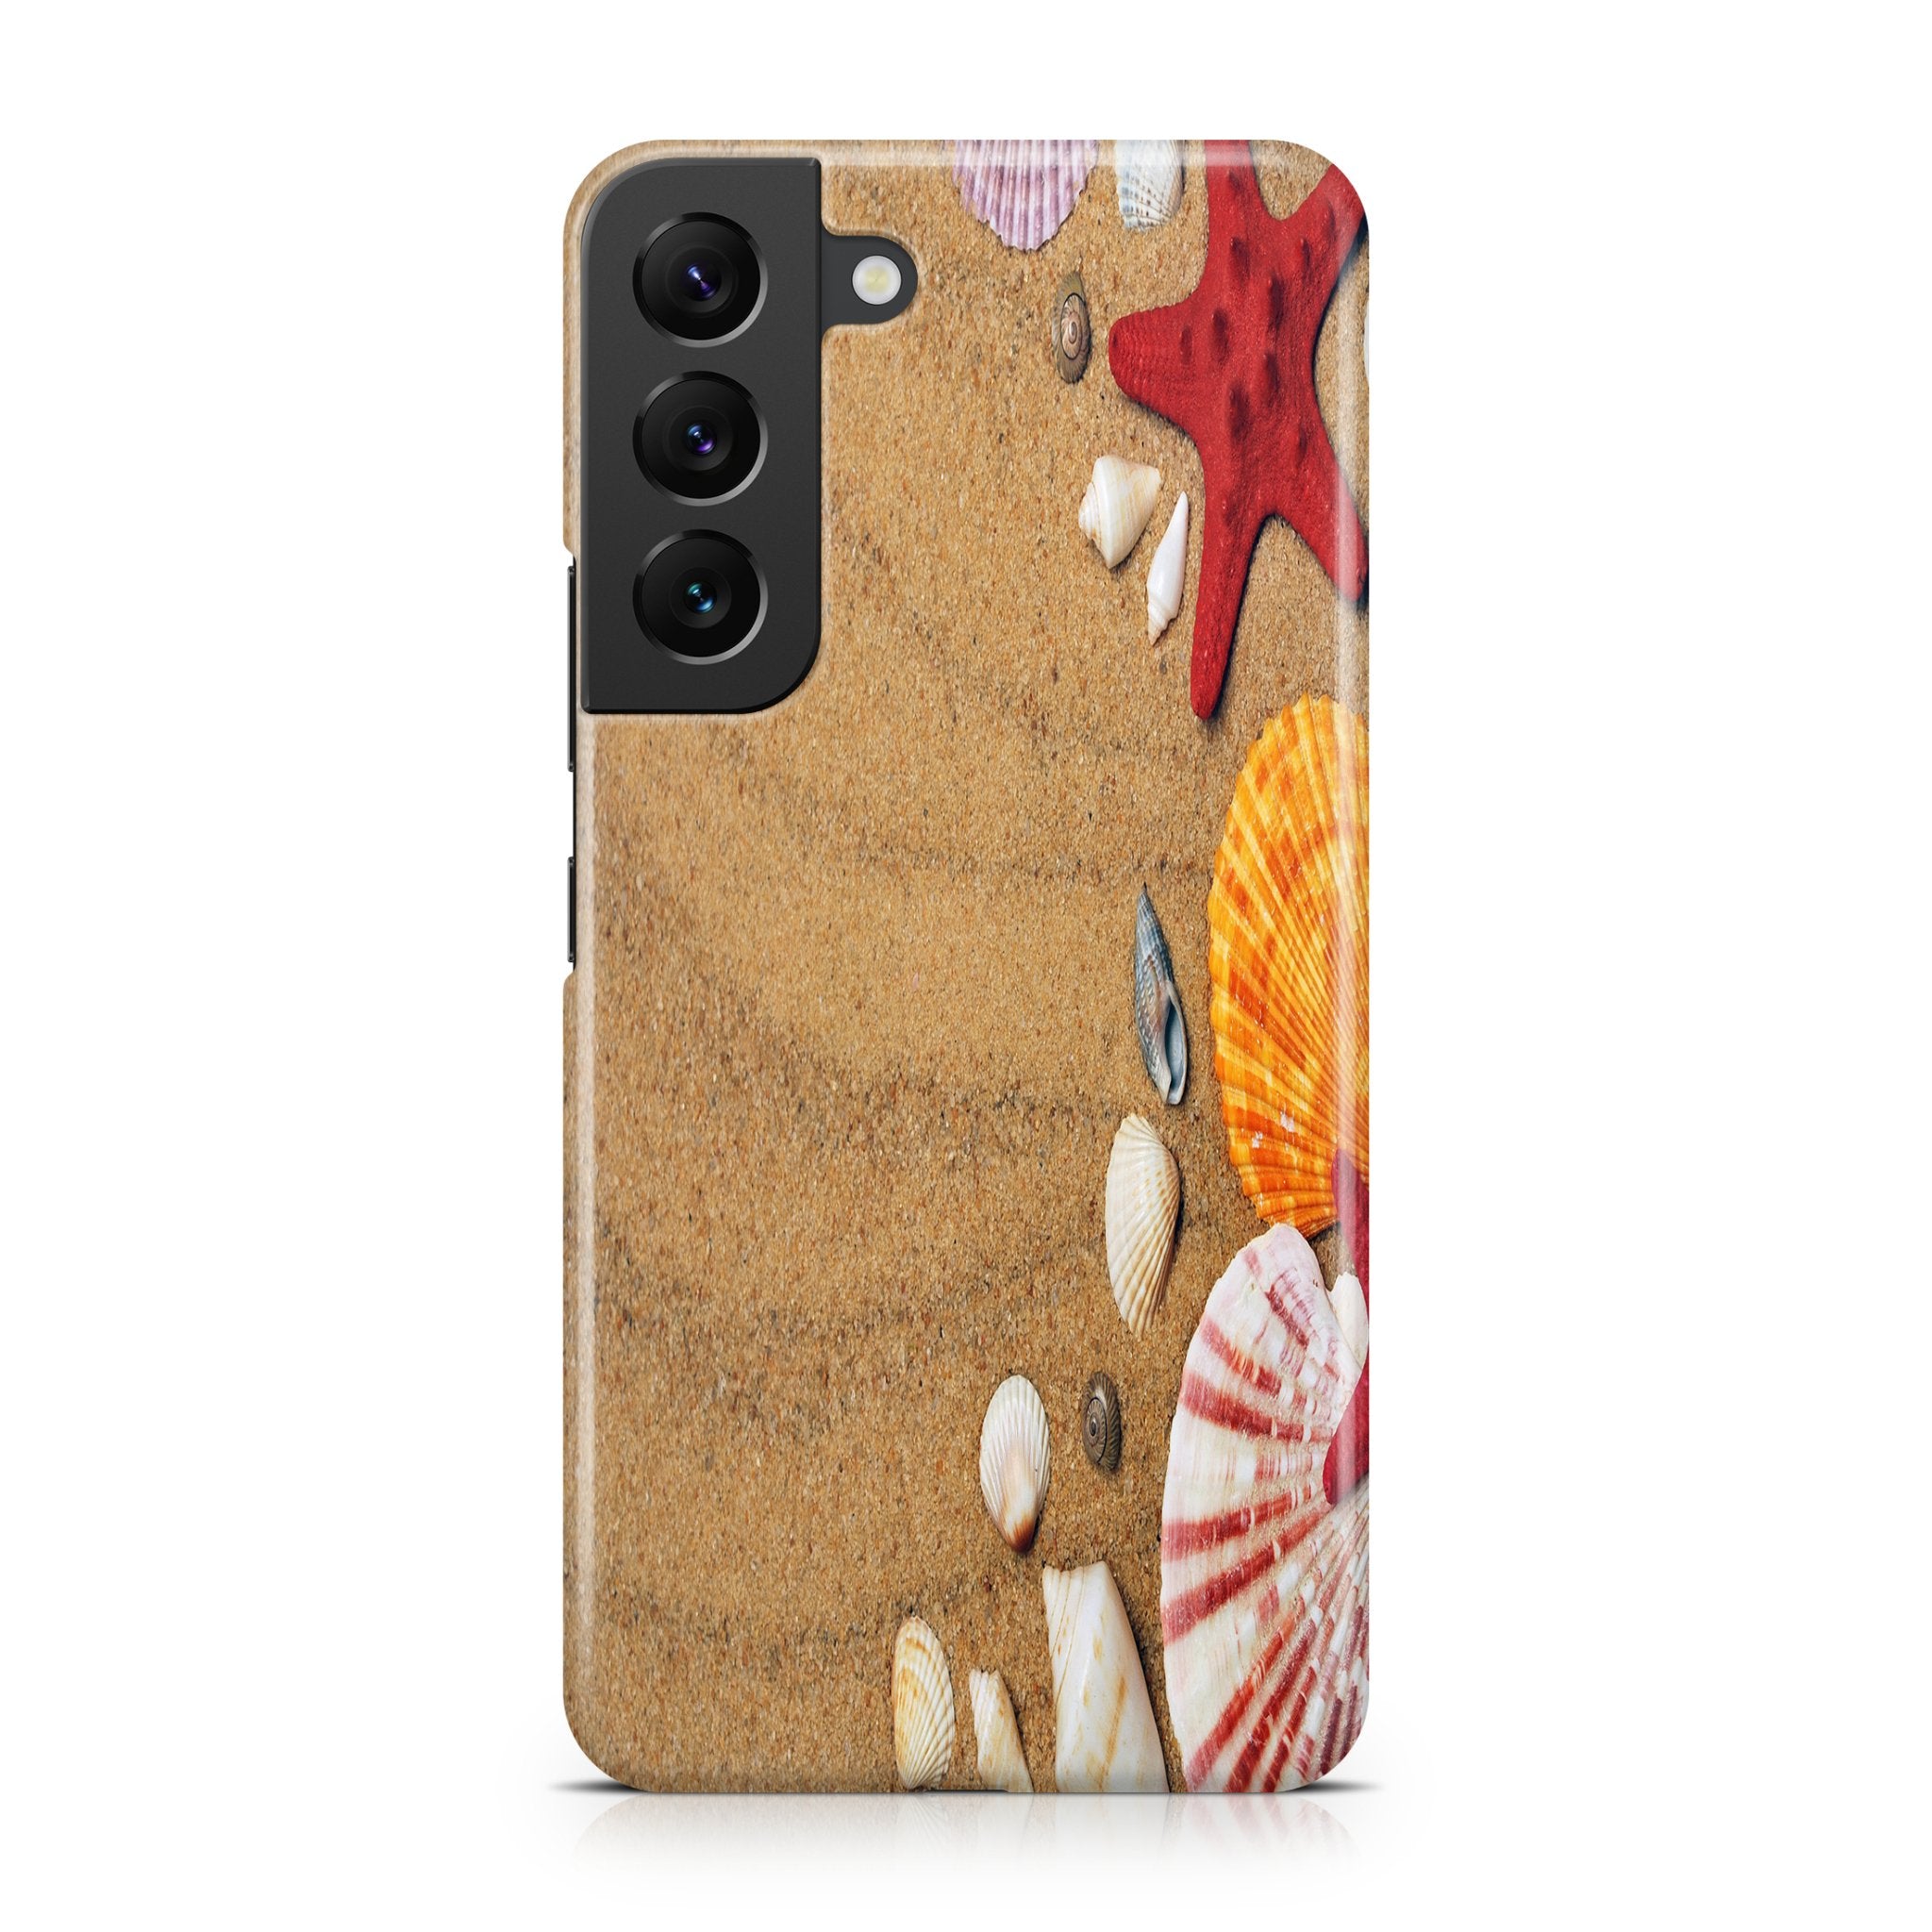 Beach Time - Samsung phone case designs by CaseSwagger